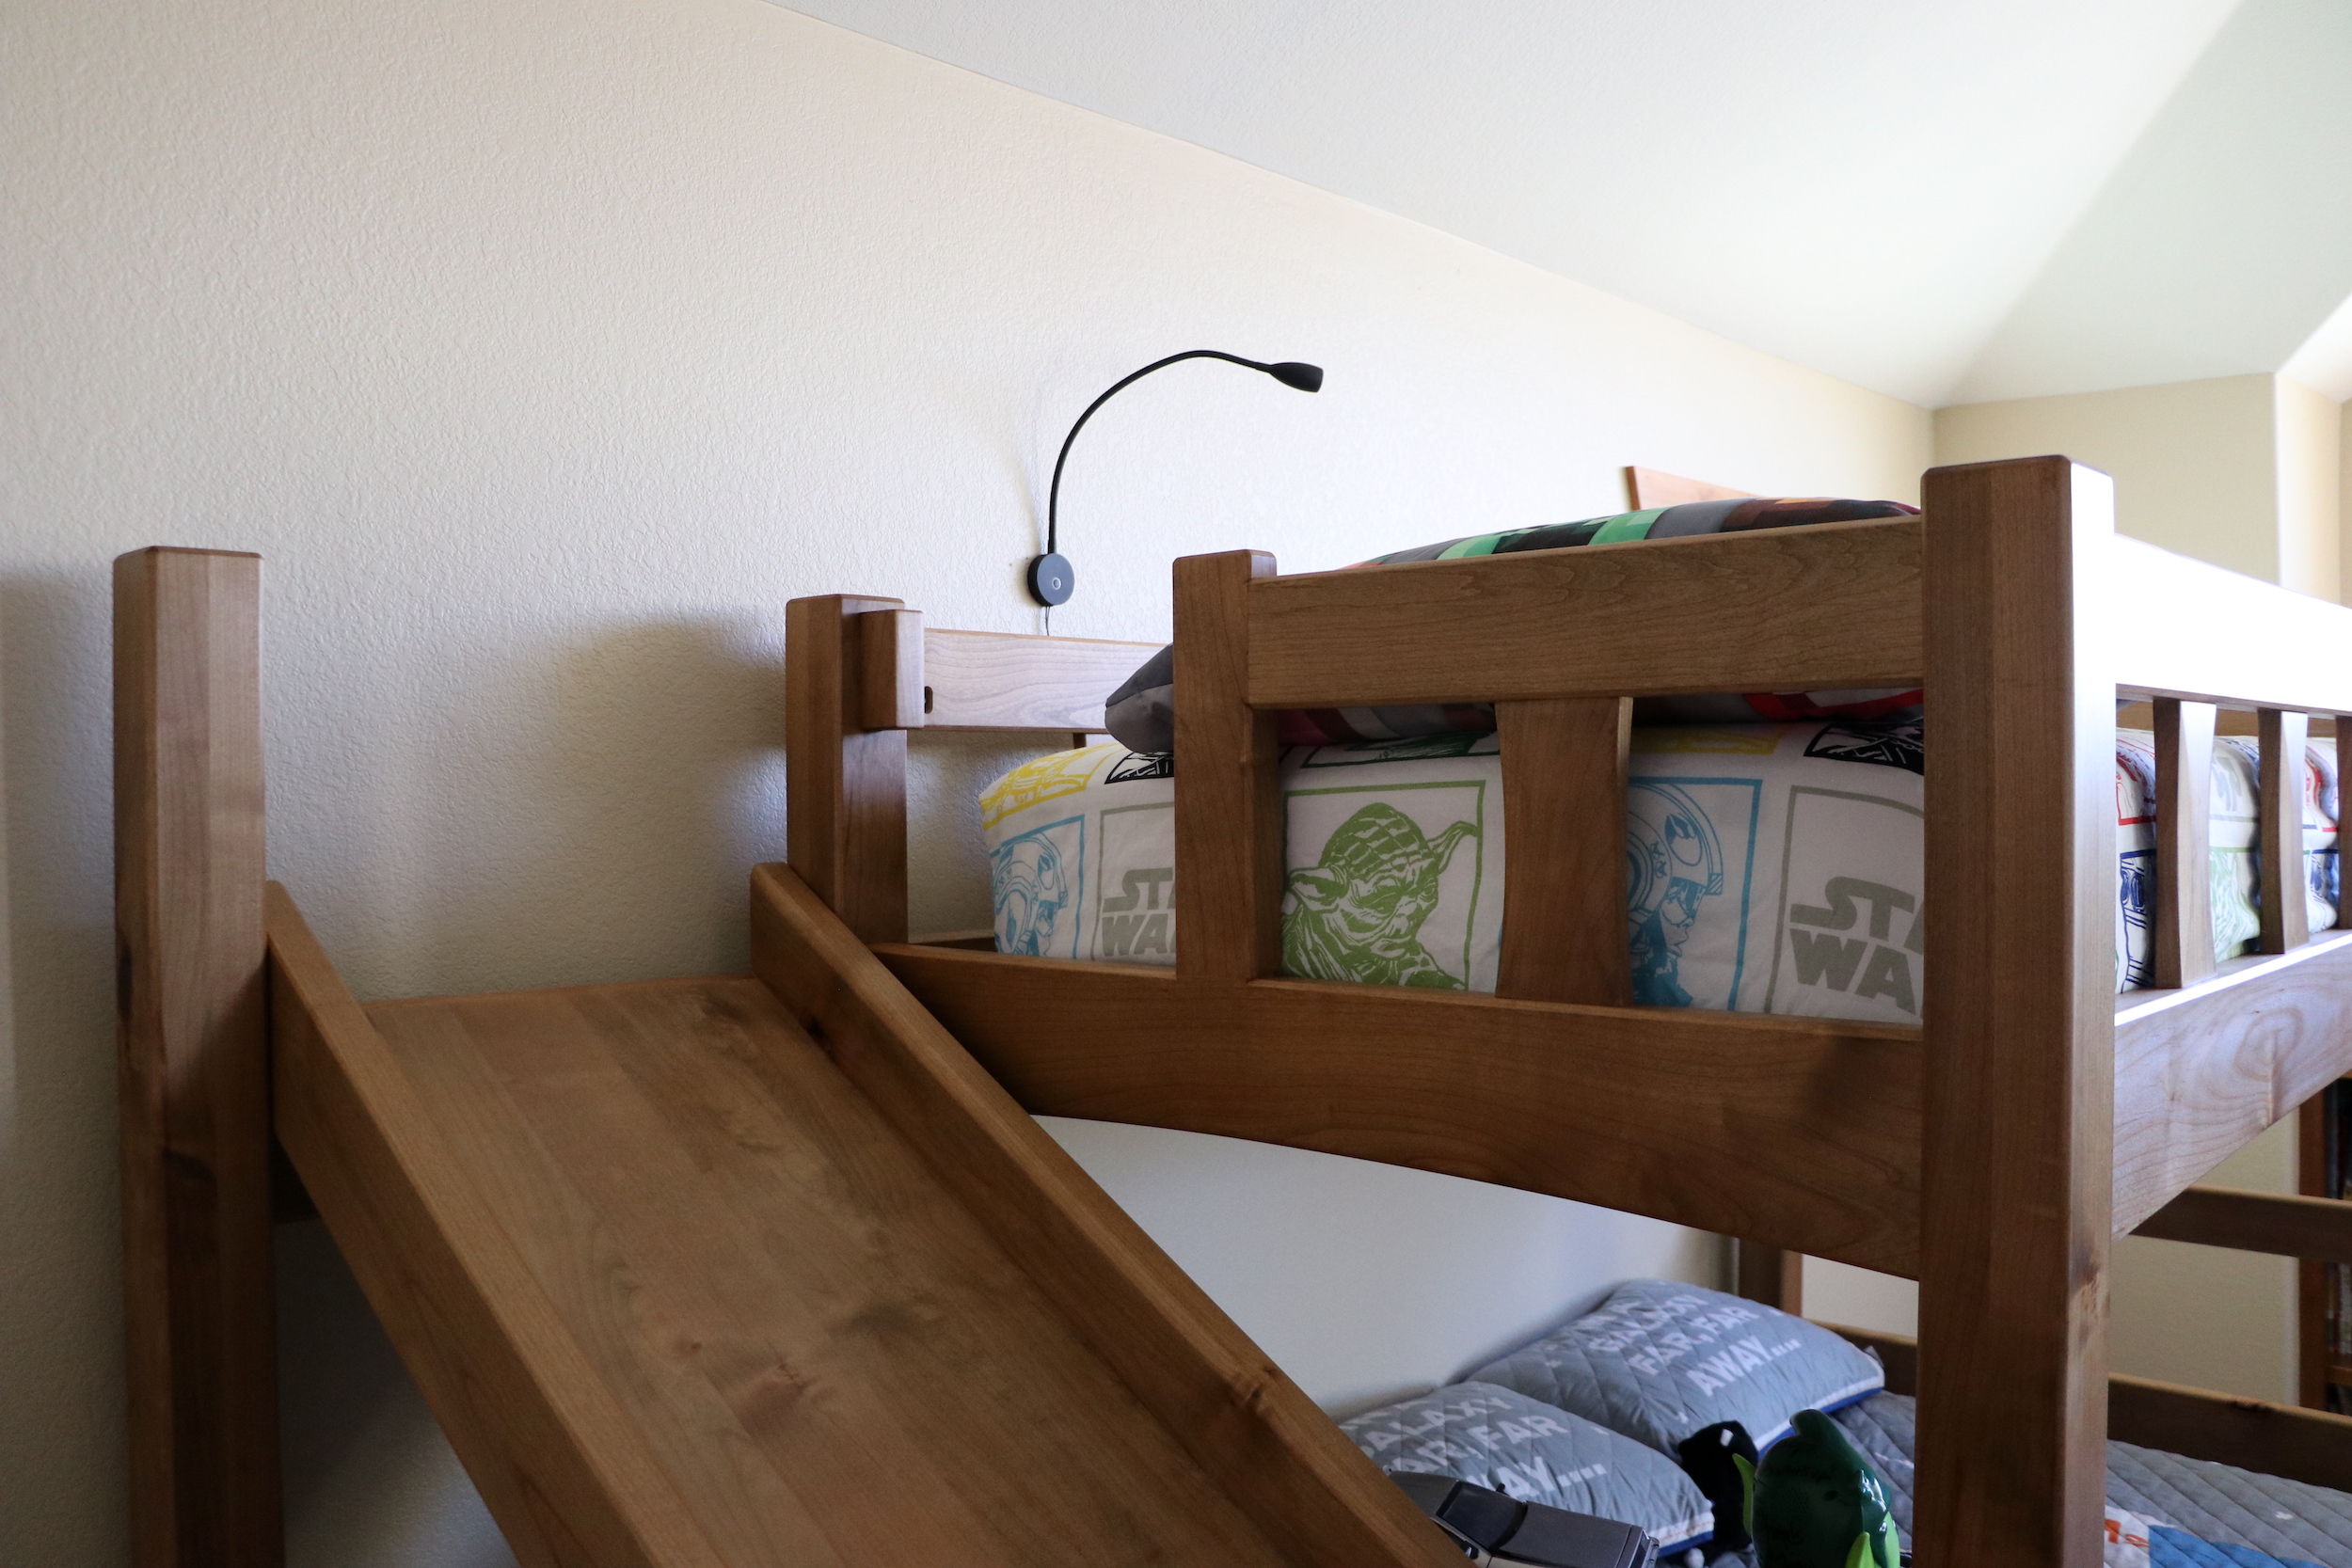 Bunk Bed With Slide The Wood Whisperer, Build Your Own Bunk Bed With Slide